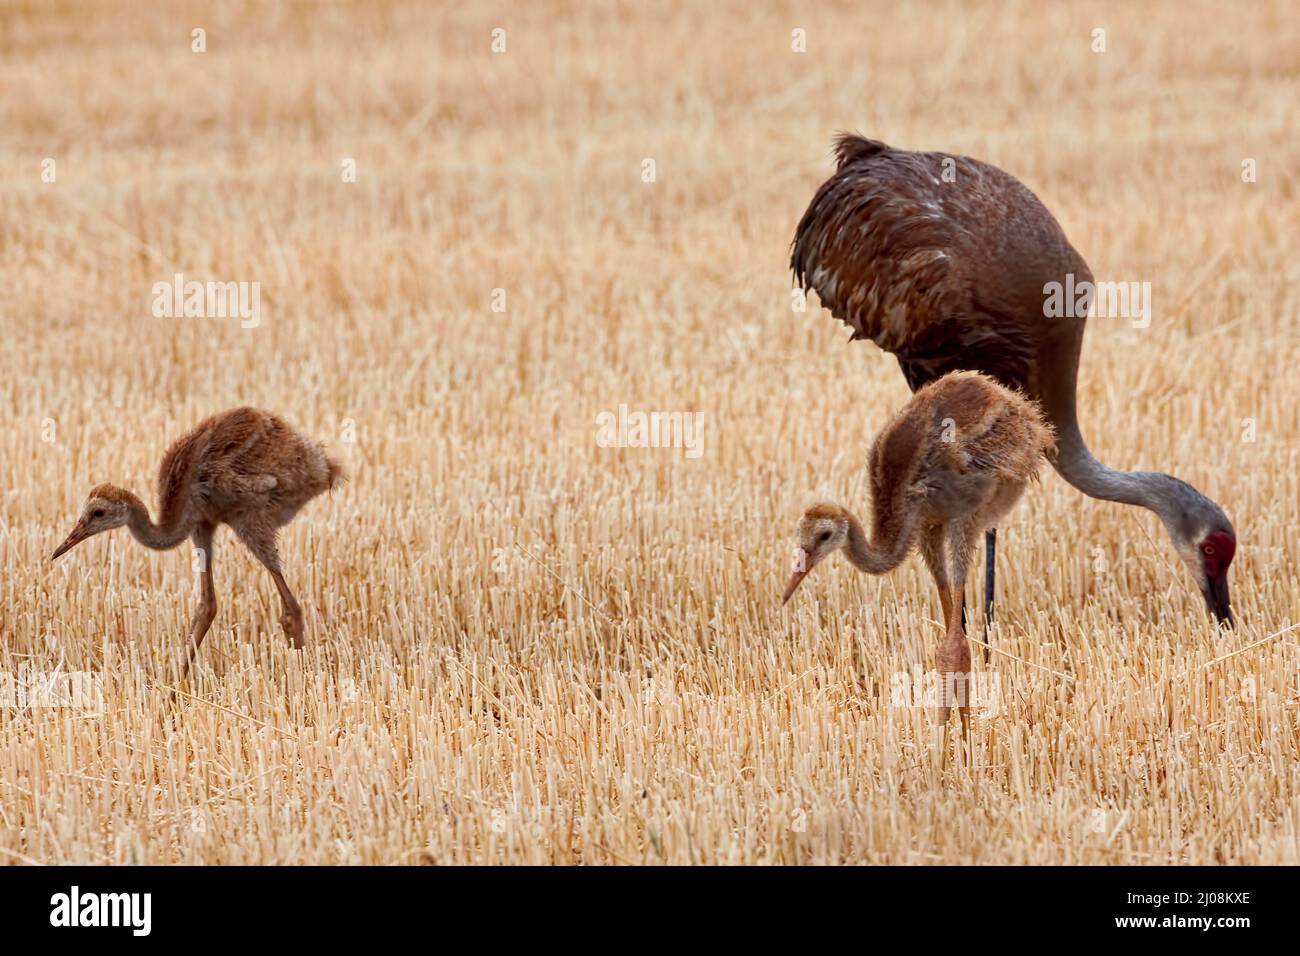 A Sandhill Crane family, Grus canadensis, hunting Stock Photo